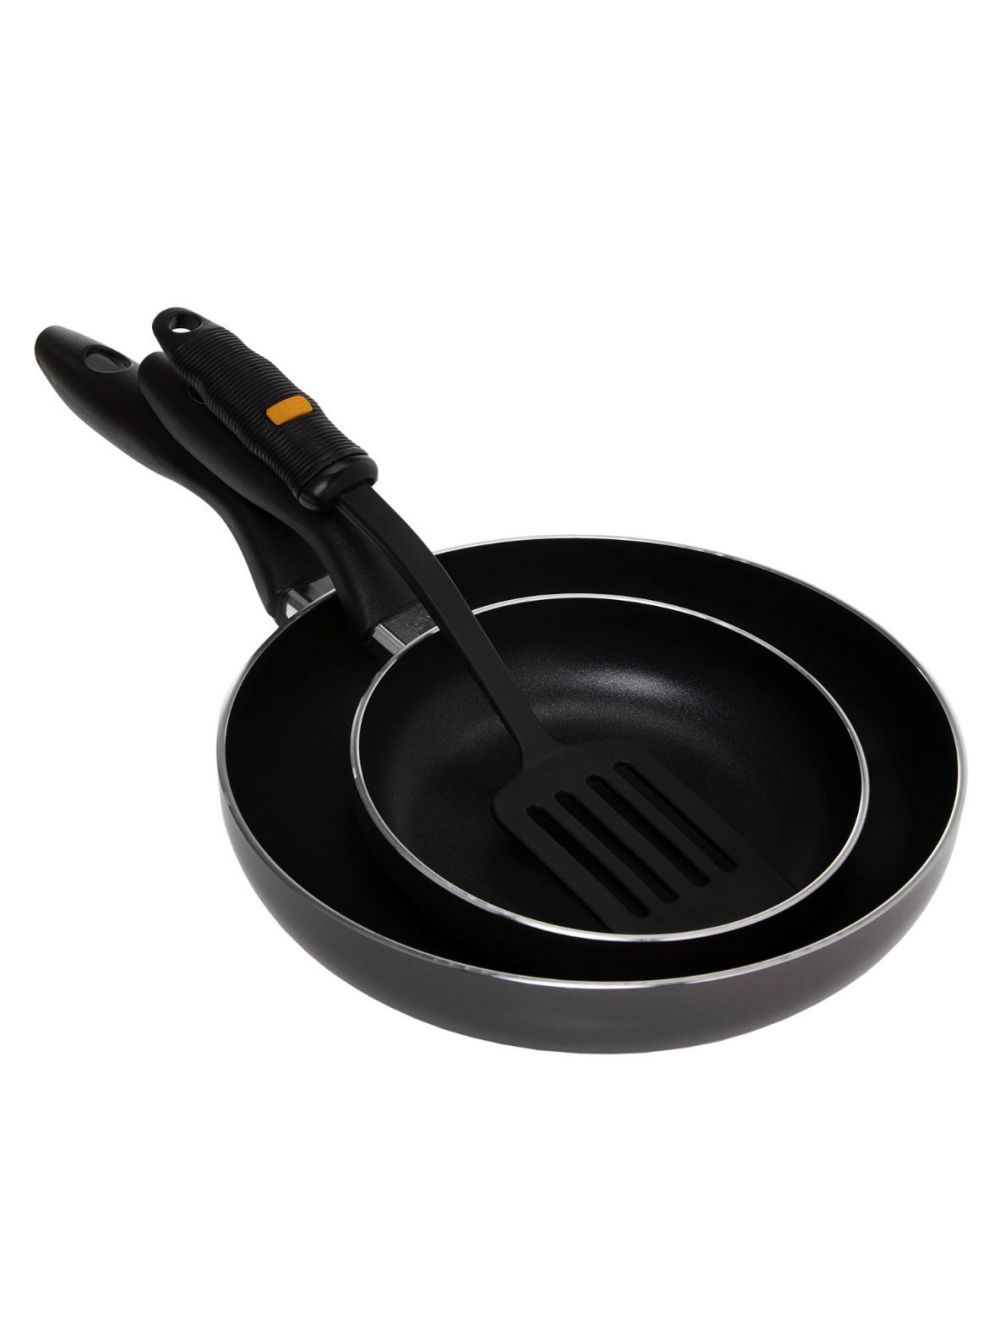 Royalford RF4126FP 2 Piece-Non-Stick Fry Pan Set With Slotted Turner, 18 cm, 26 cm